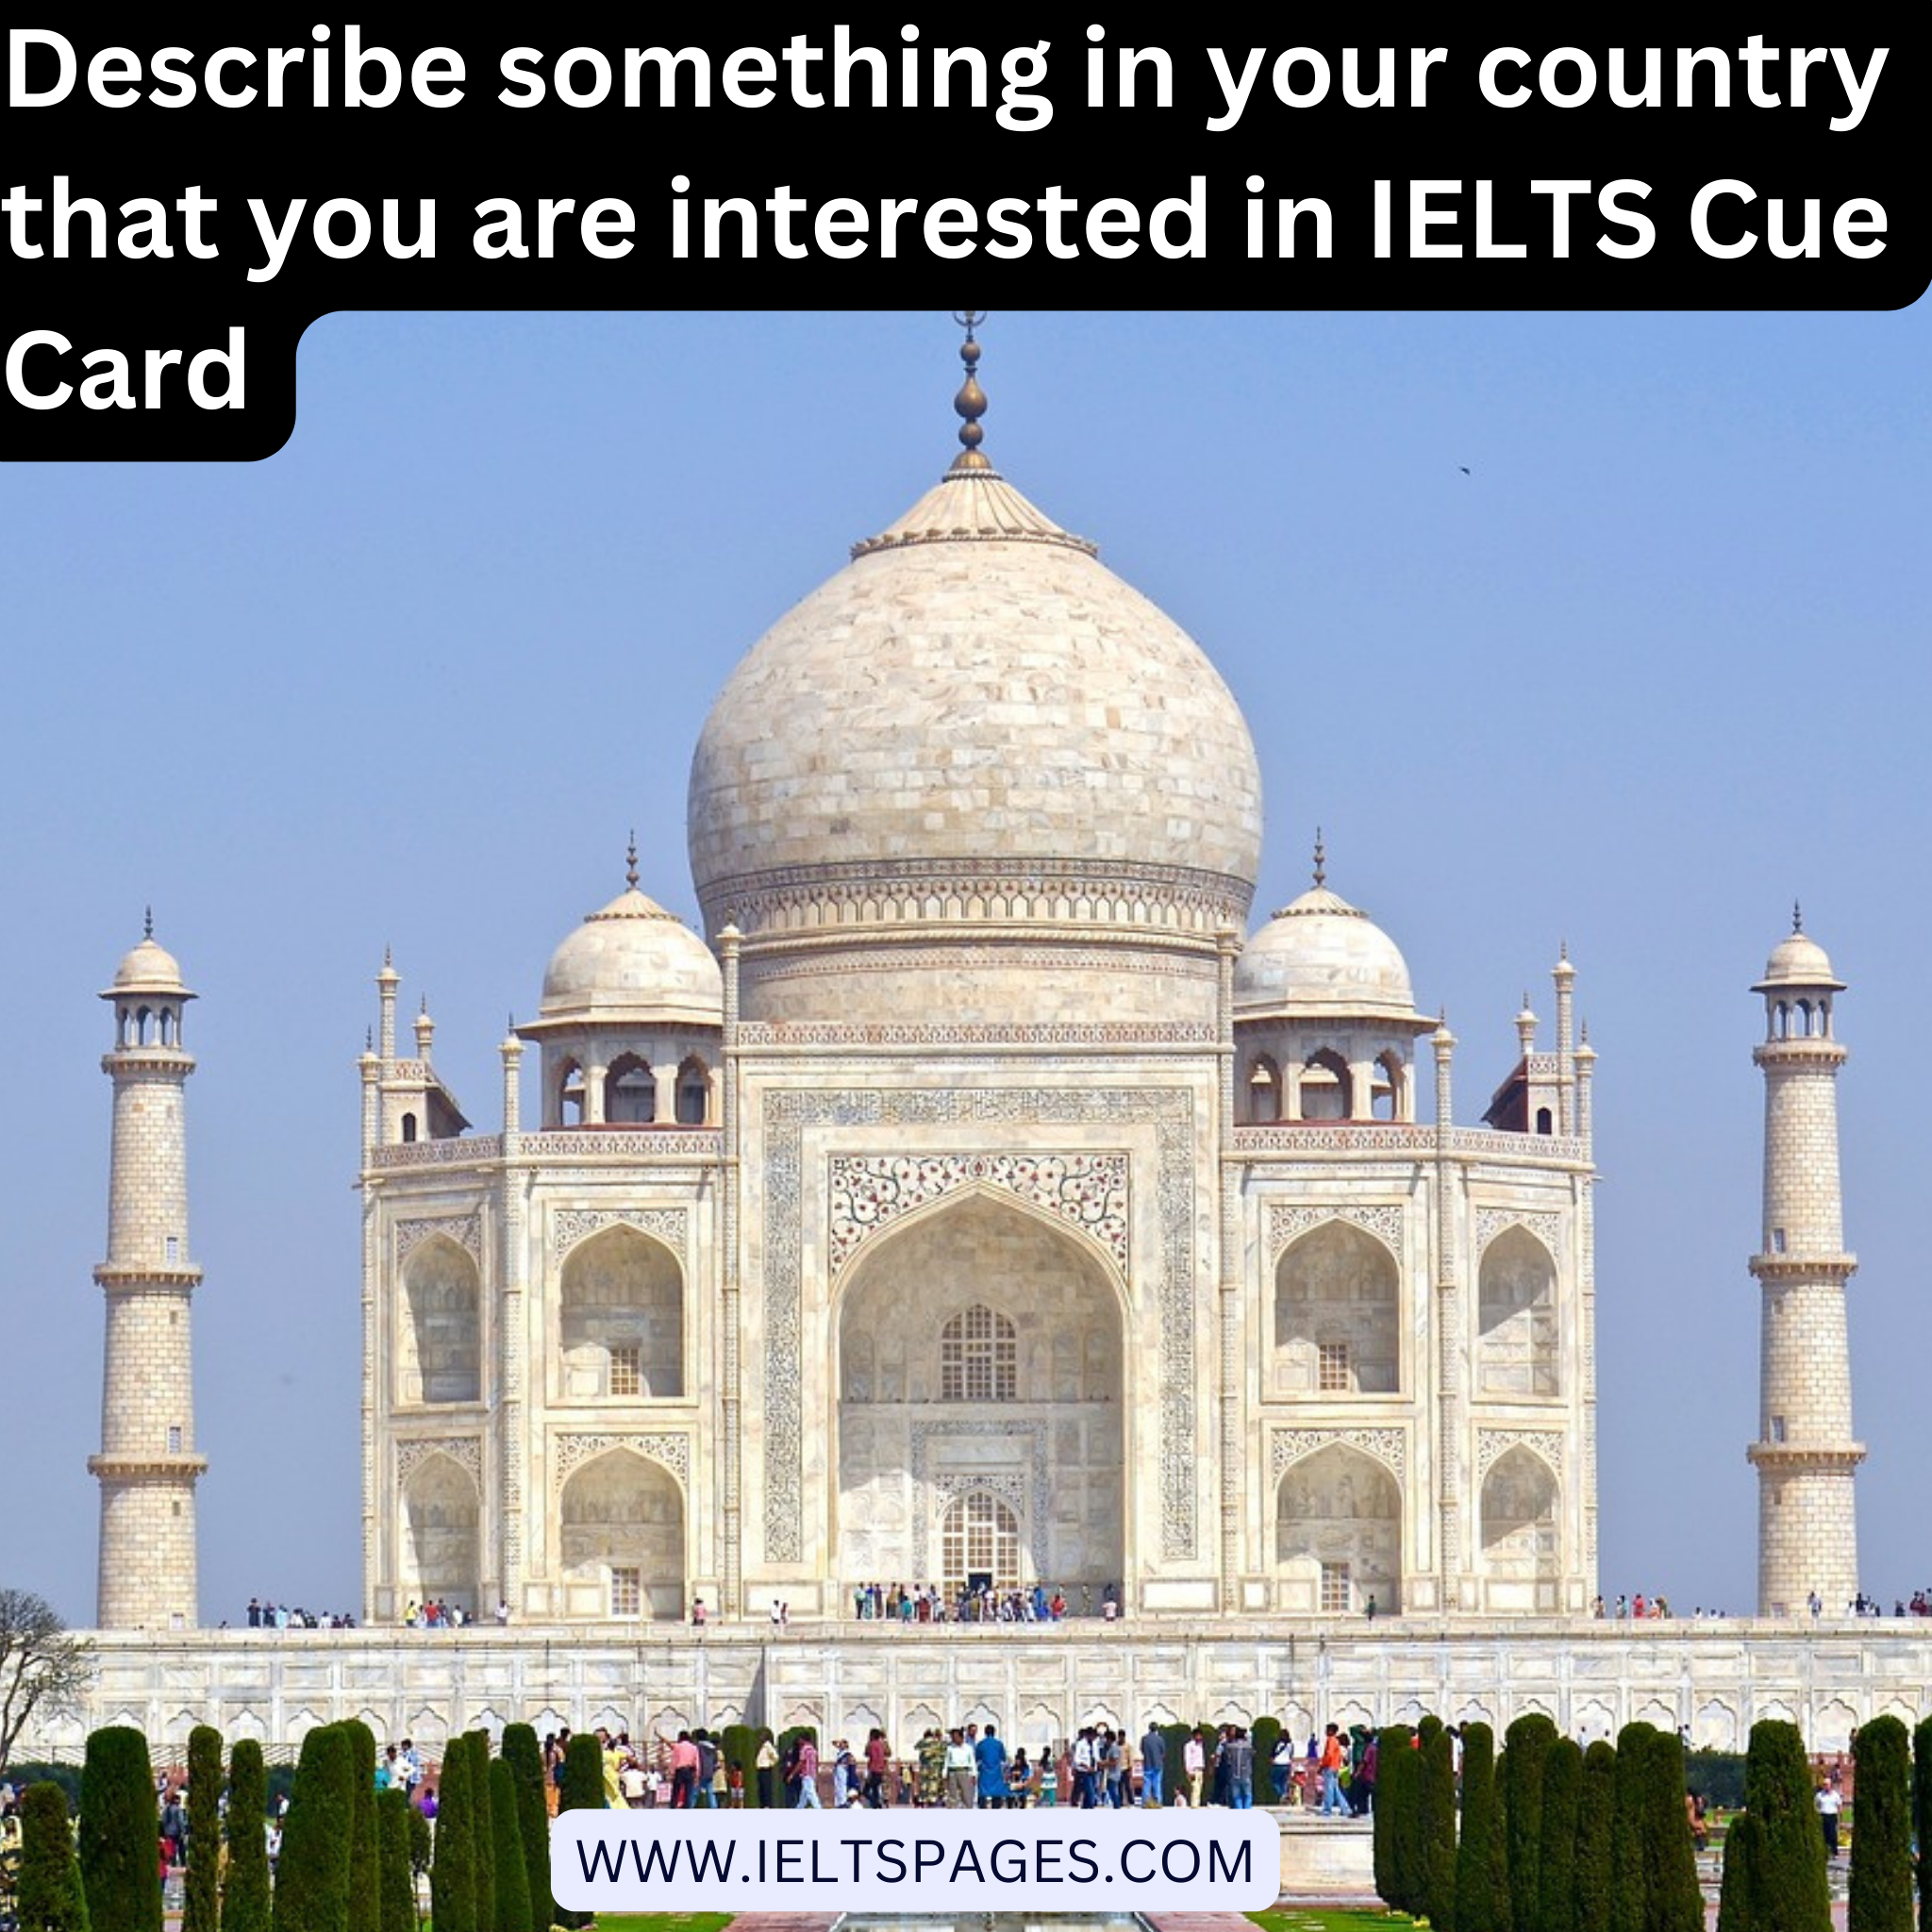 Describe something in your country that you are interested in IELTS Cue Card